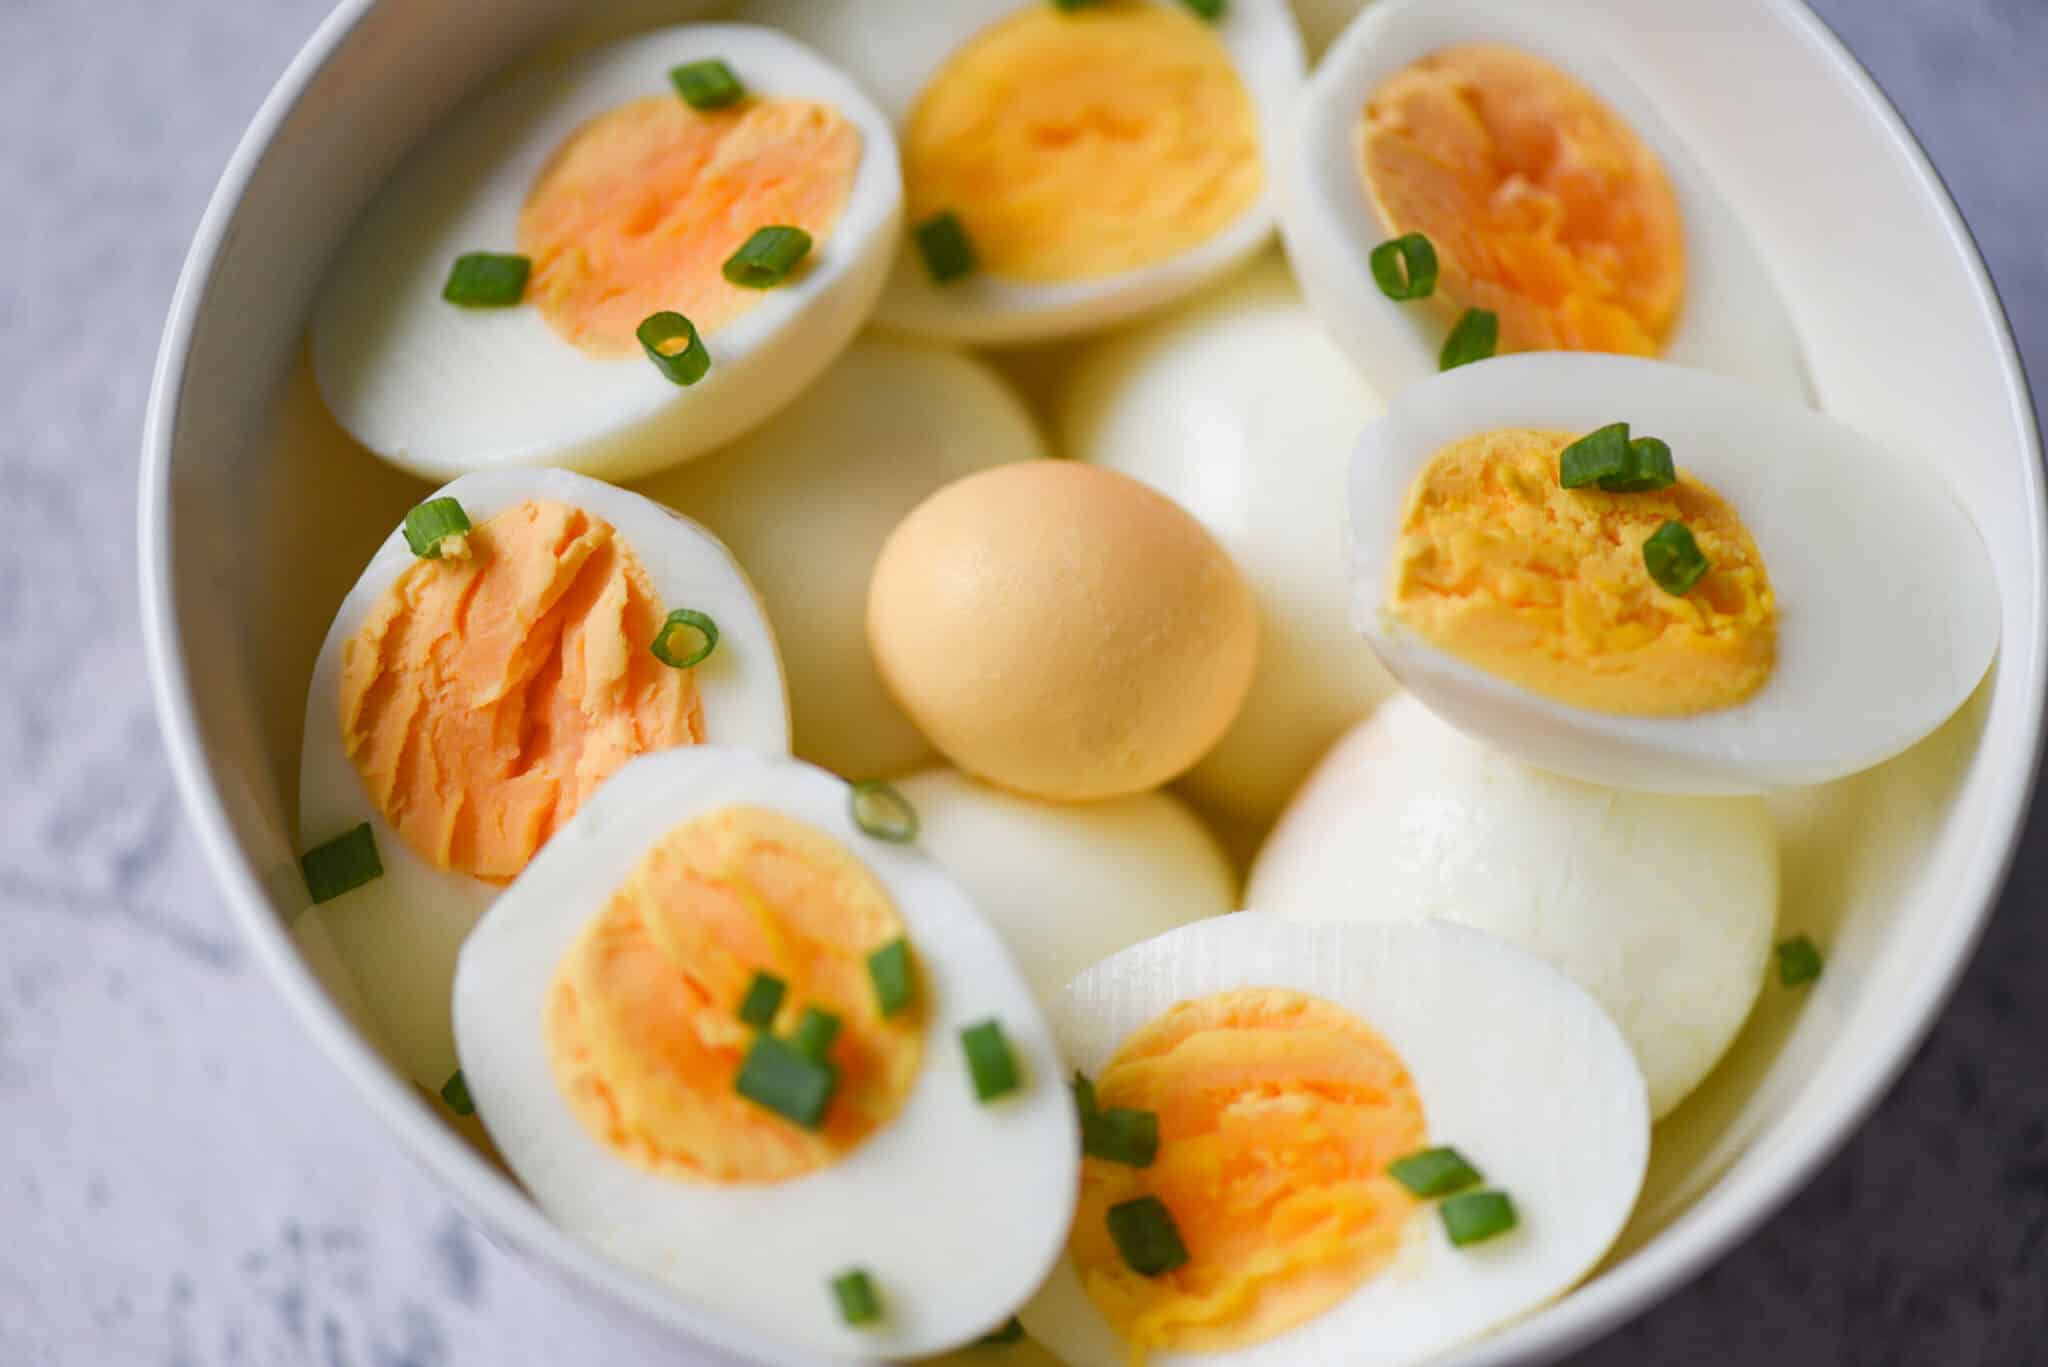 How Long to Cook Soft-Boiled Eggs